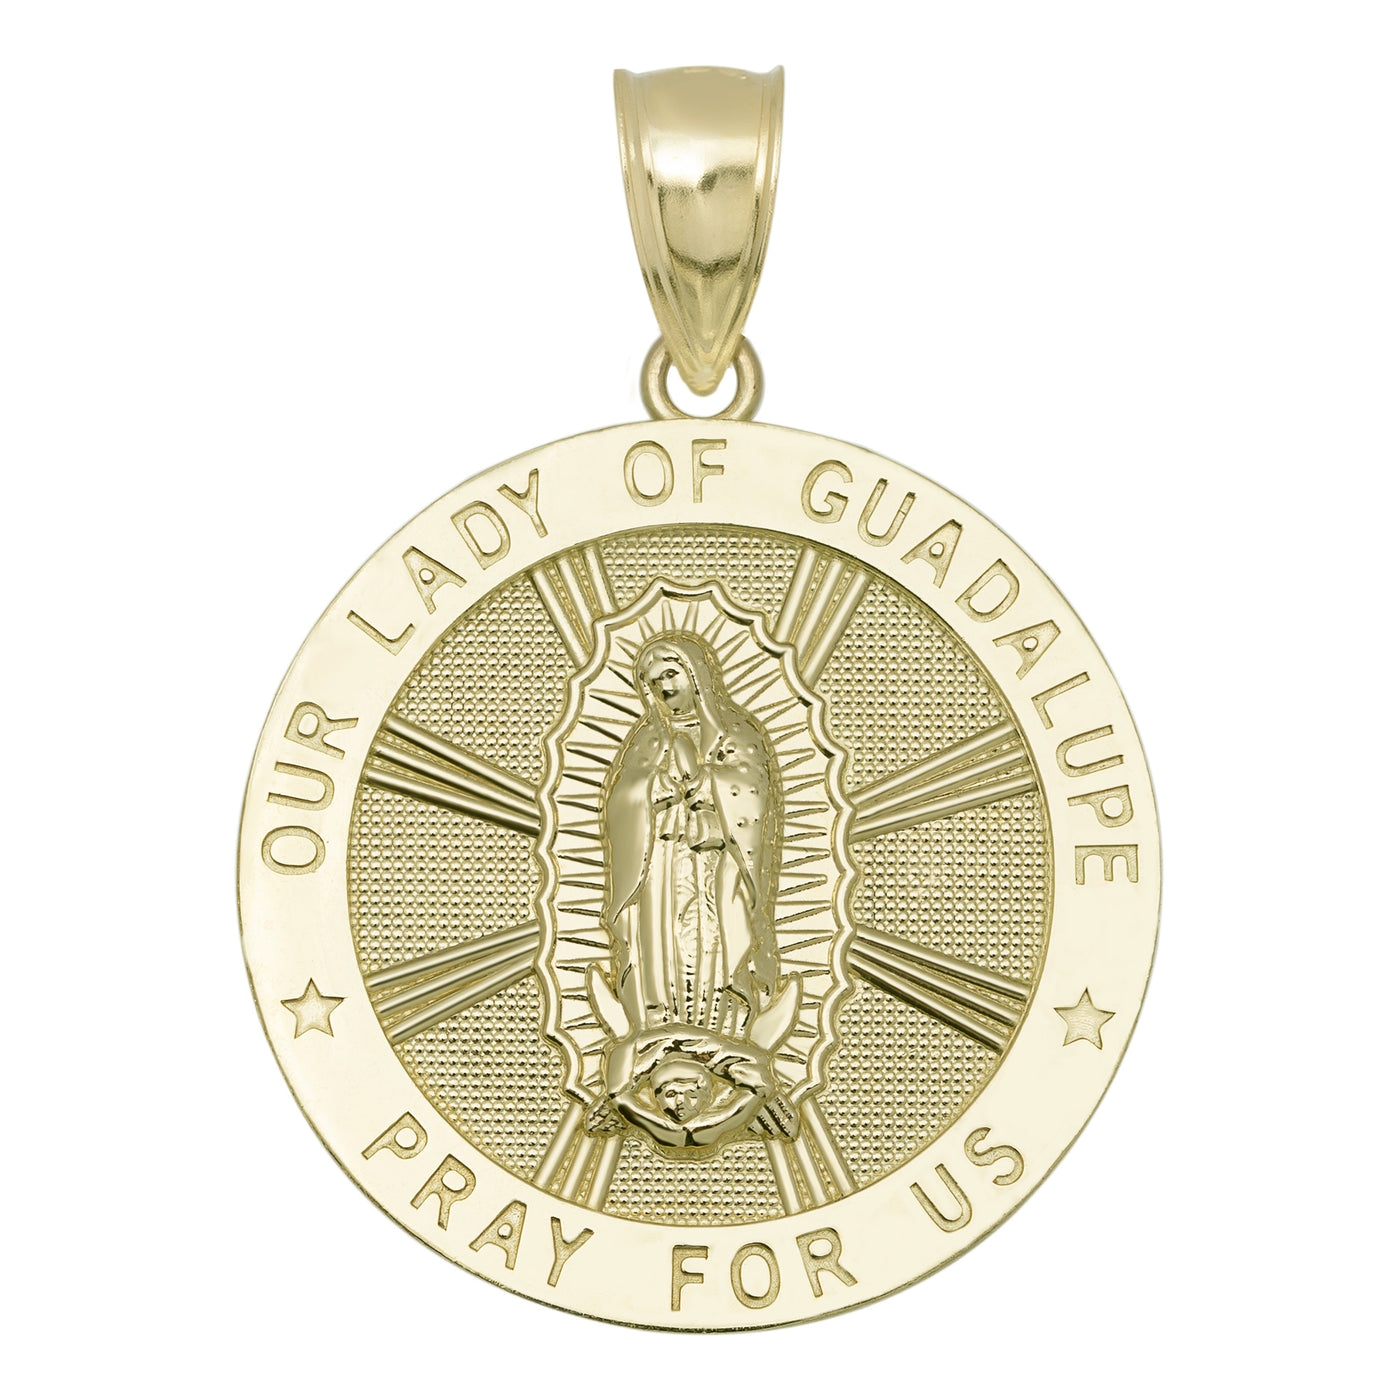 Lady Guadalupe Virgin Mary Medallion Pendant 10K Yellow Gold